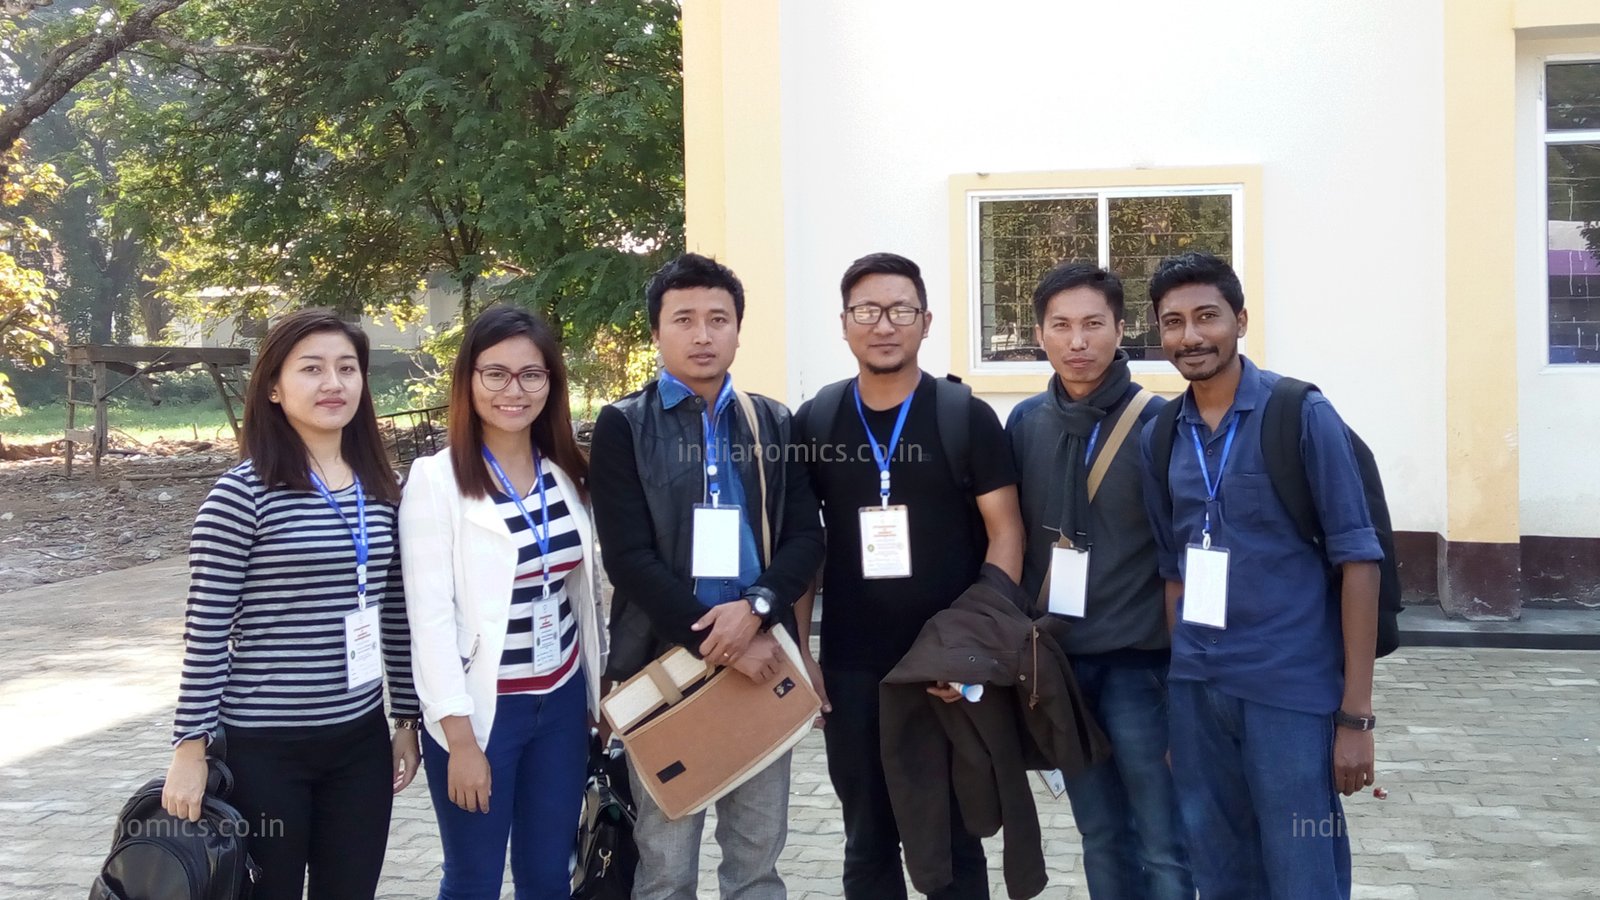 Vincent with his colleagues, University of Mizoram